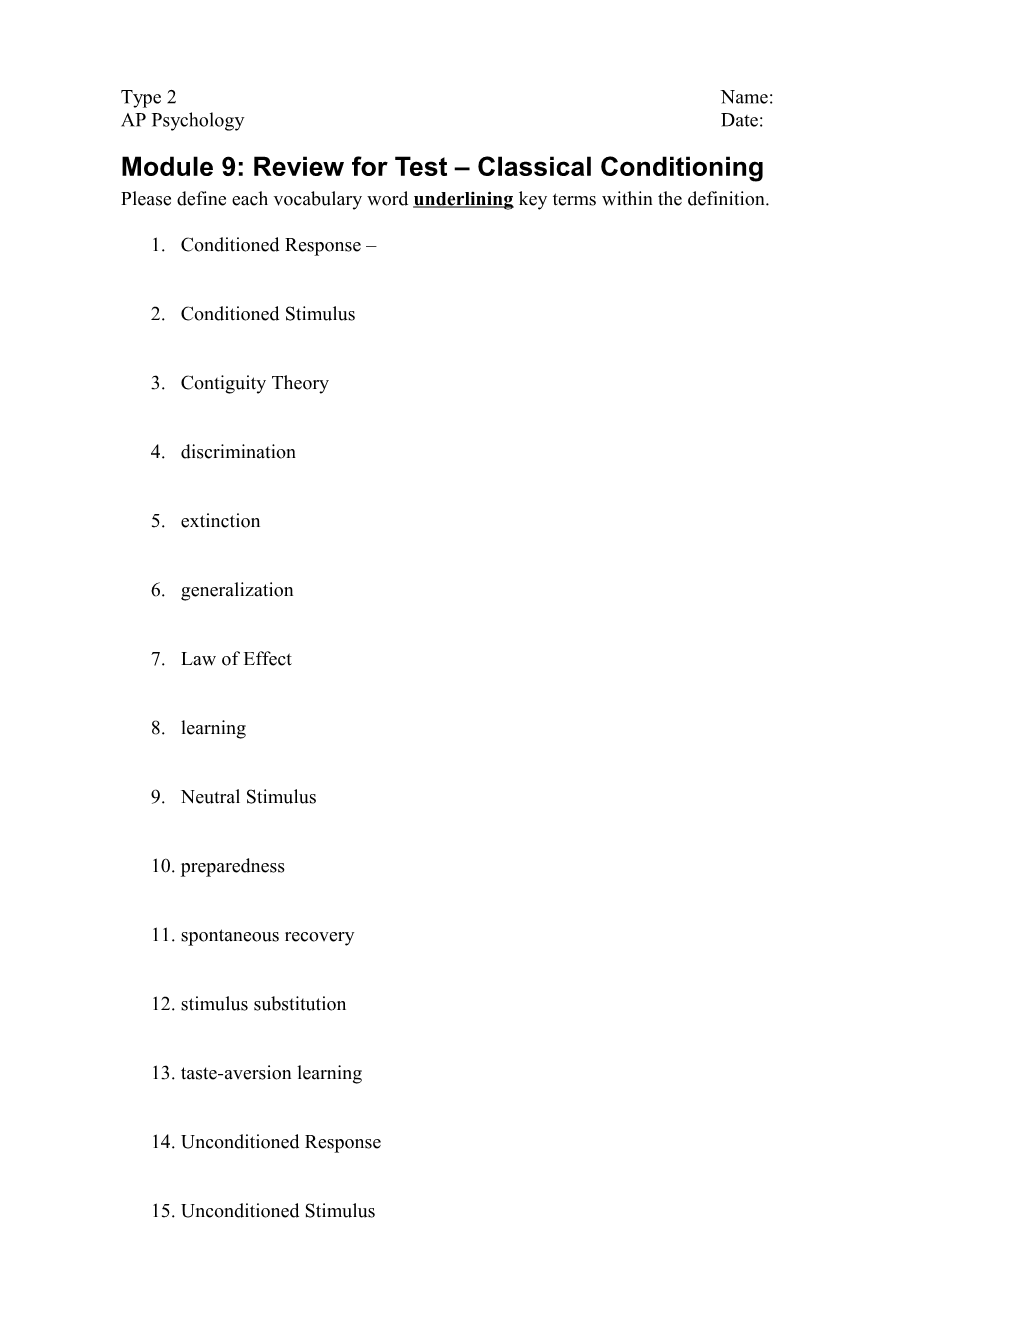 Module 9: Review for Test Classical Conditioning